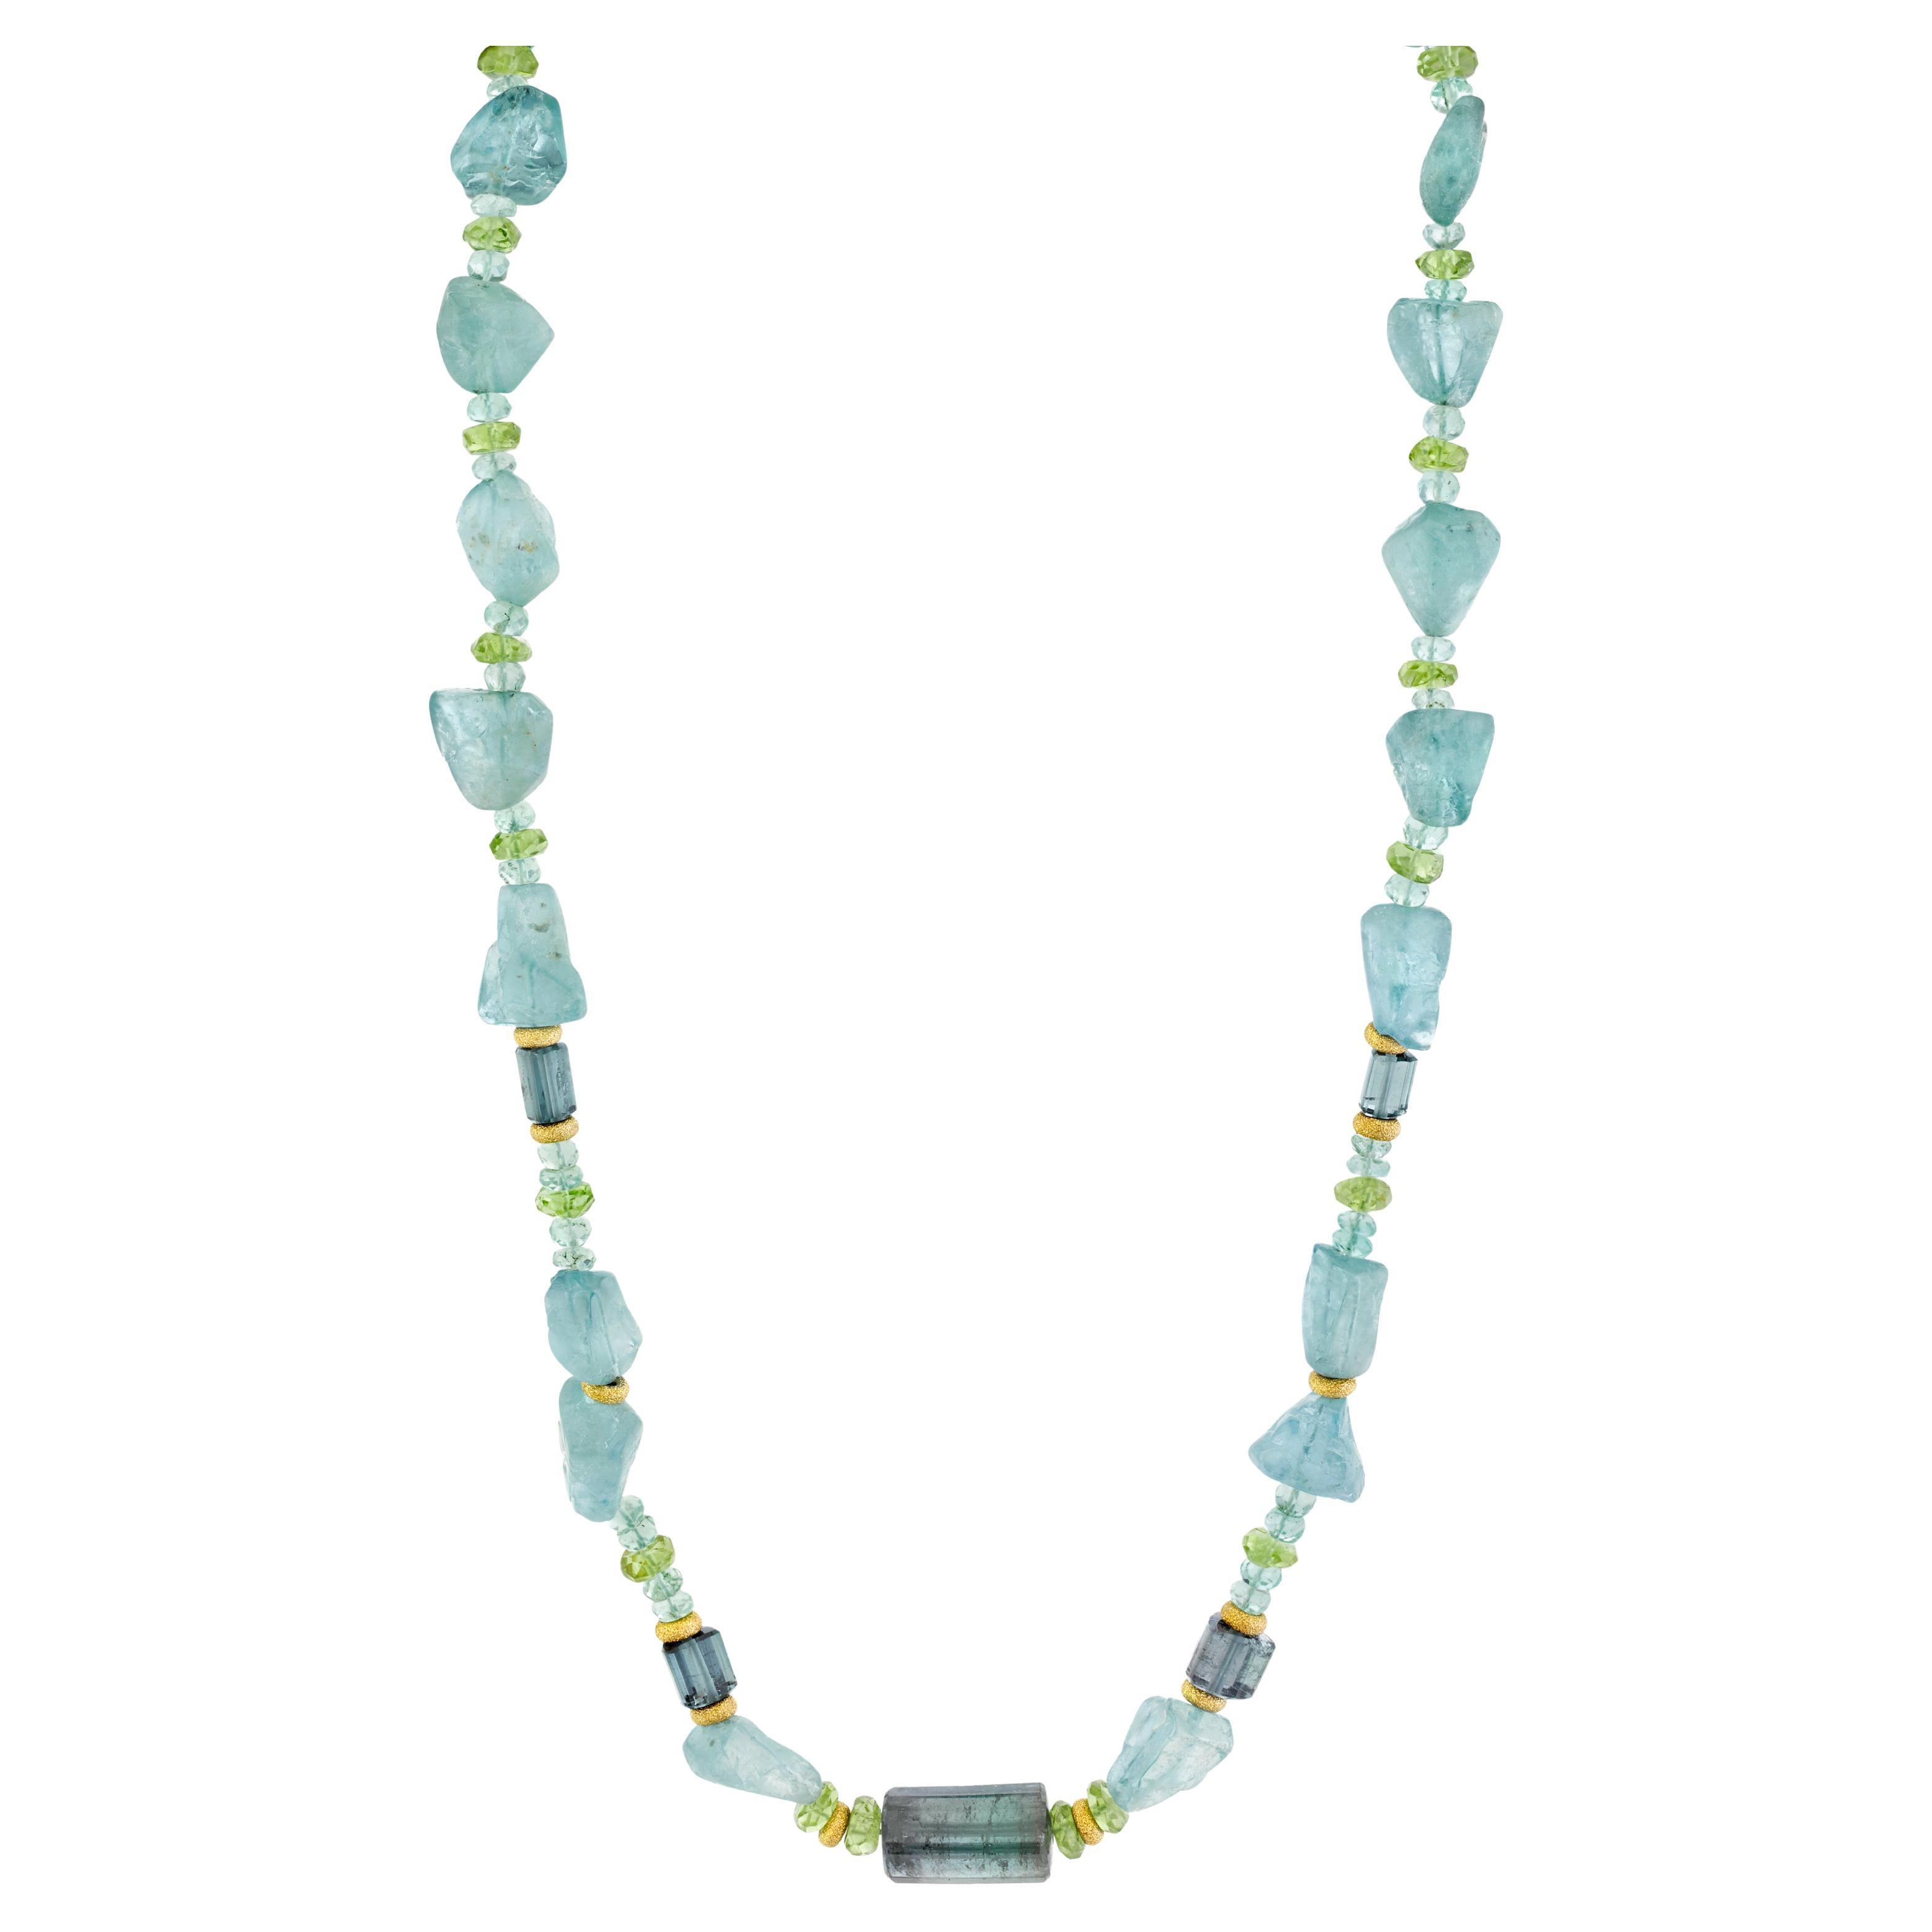 Aquamarine, Indicolite Tourmaline and Peridot Beaded Necklace with Gold Accents